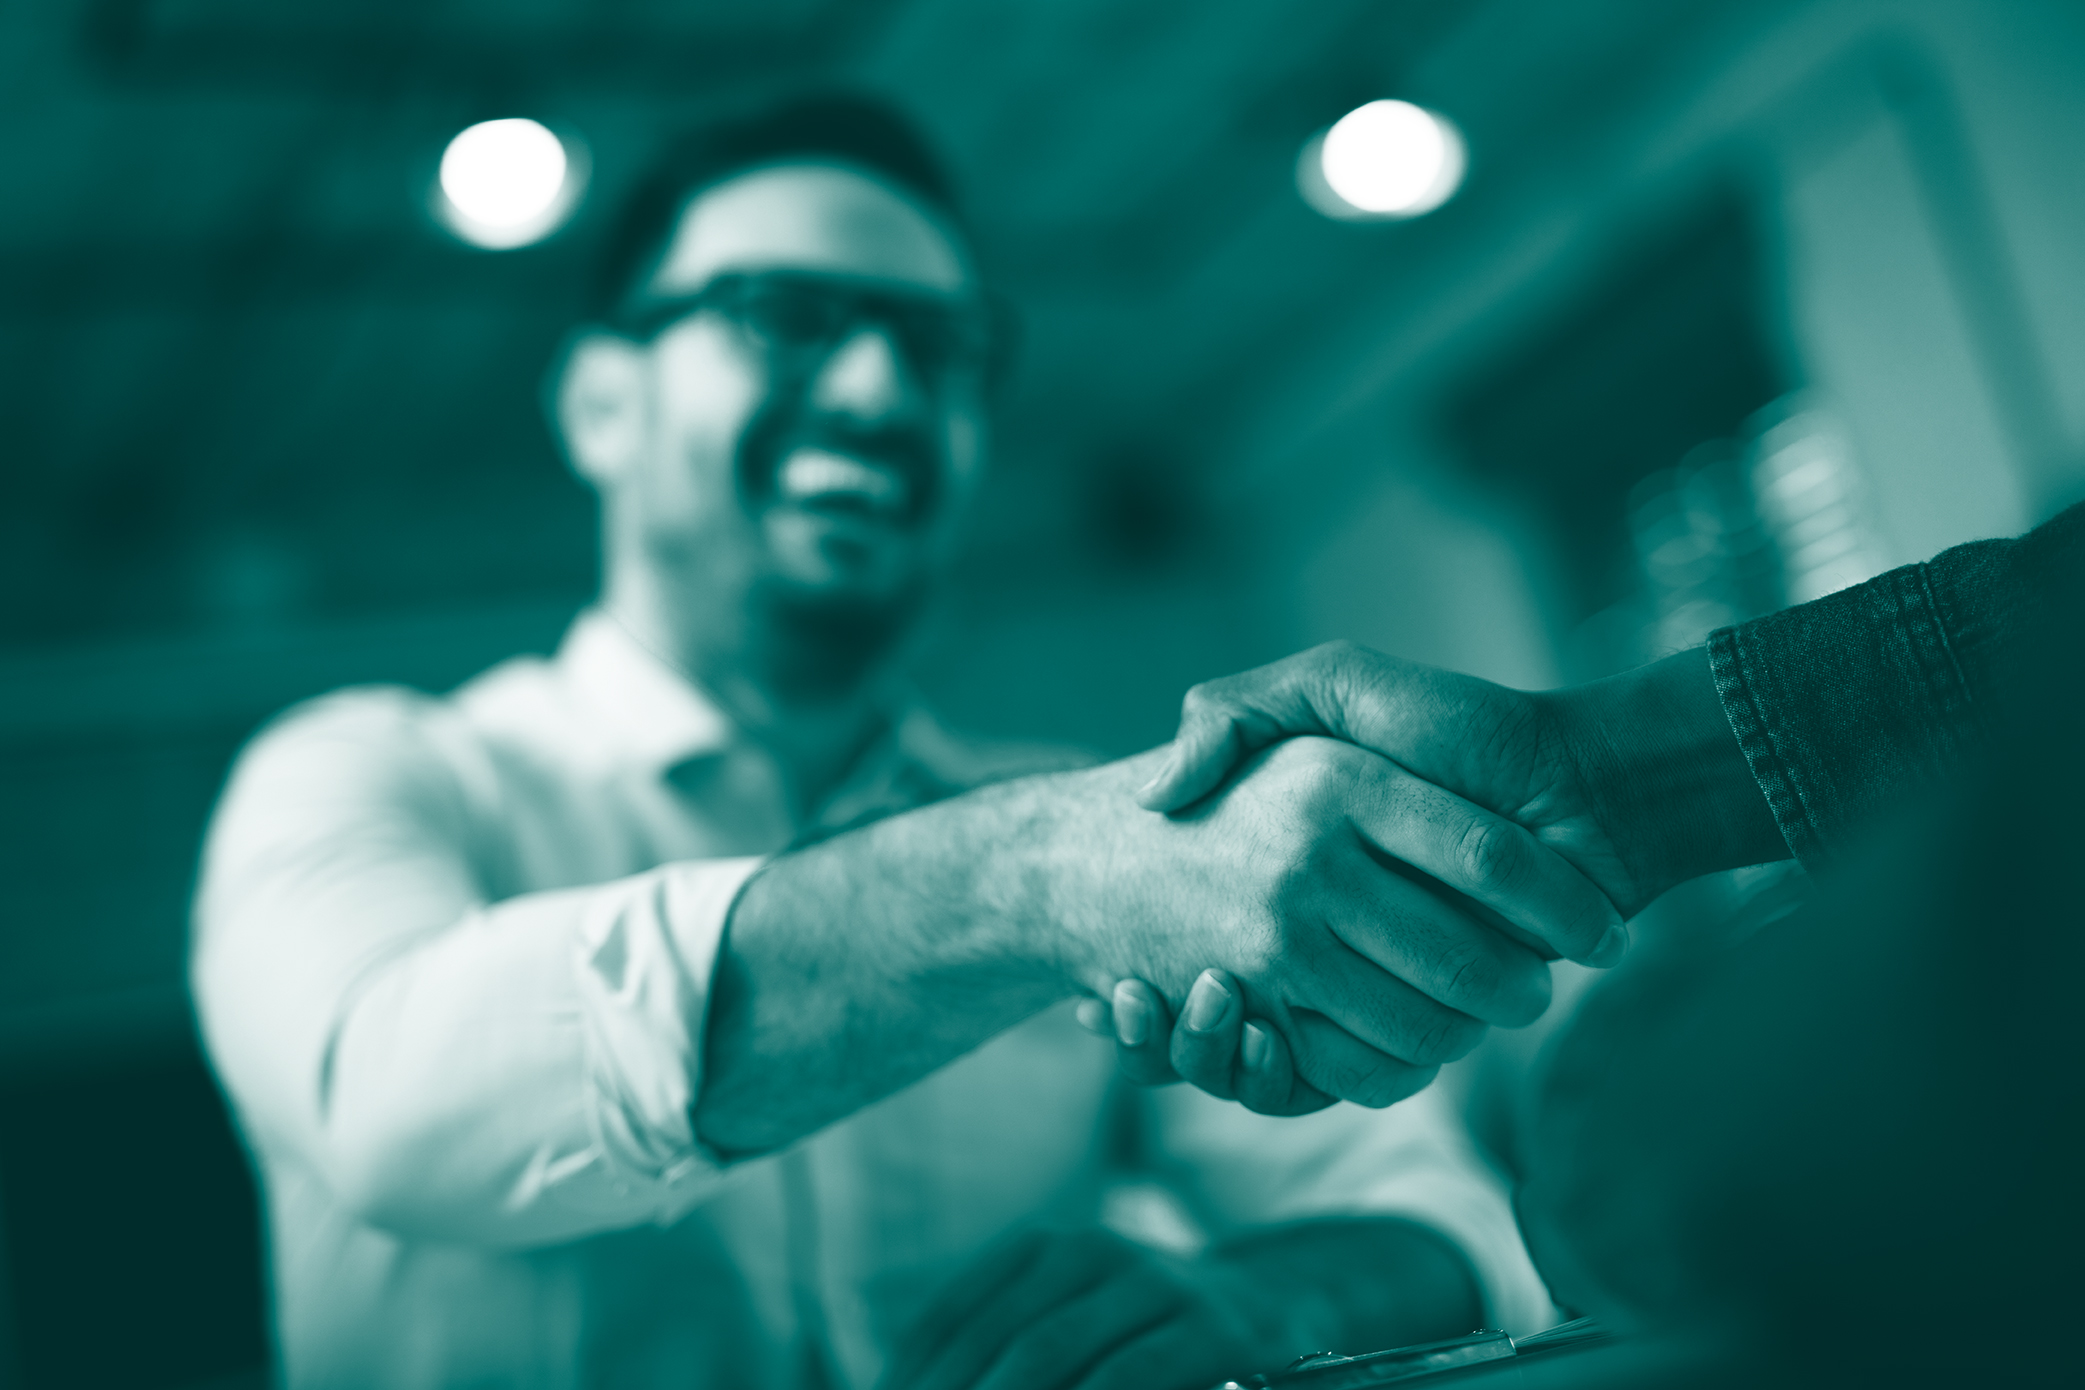 Photo of two people shaking hands meant to illustrate the bond between customer and company in keeping a valued customer